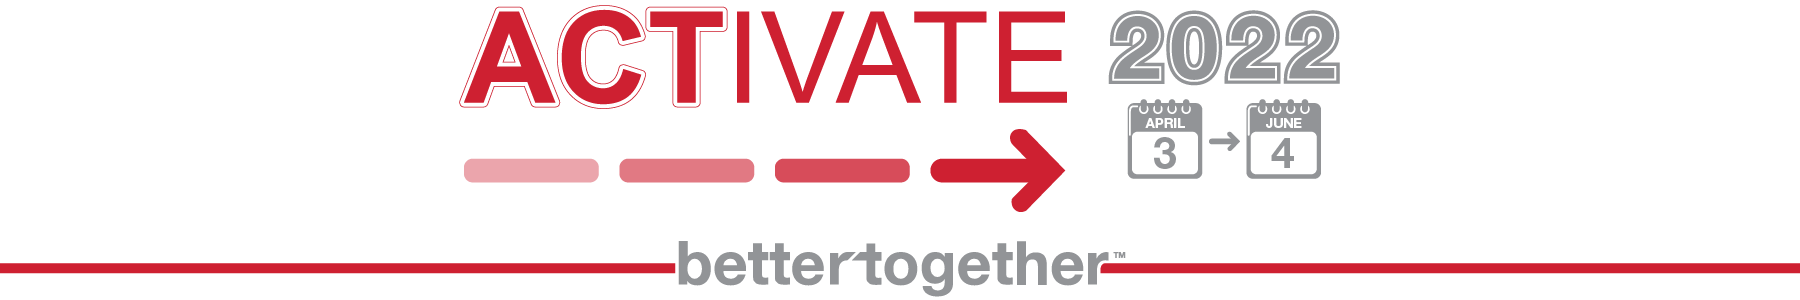 Activate 2022 Better Together